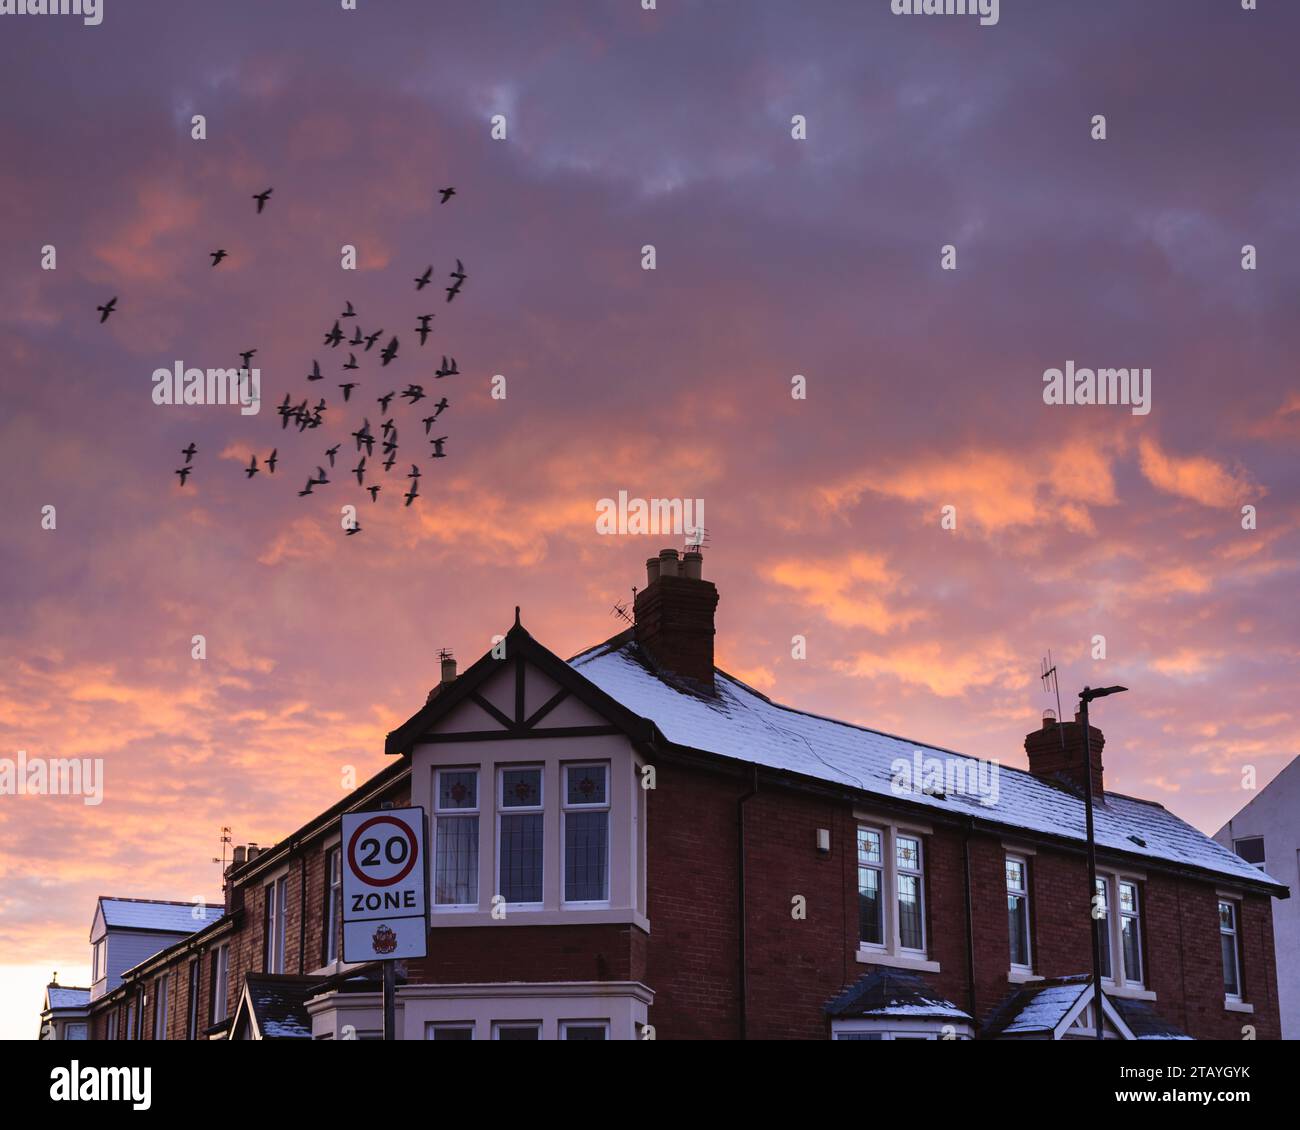 Flock of birds flying fast over a 20 mph speed sign at sunset over houses with snow on their roof Stock Photo